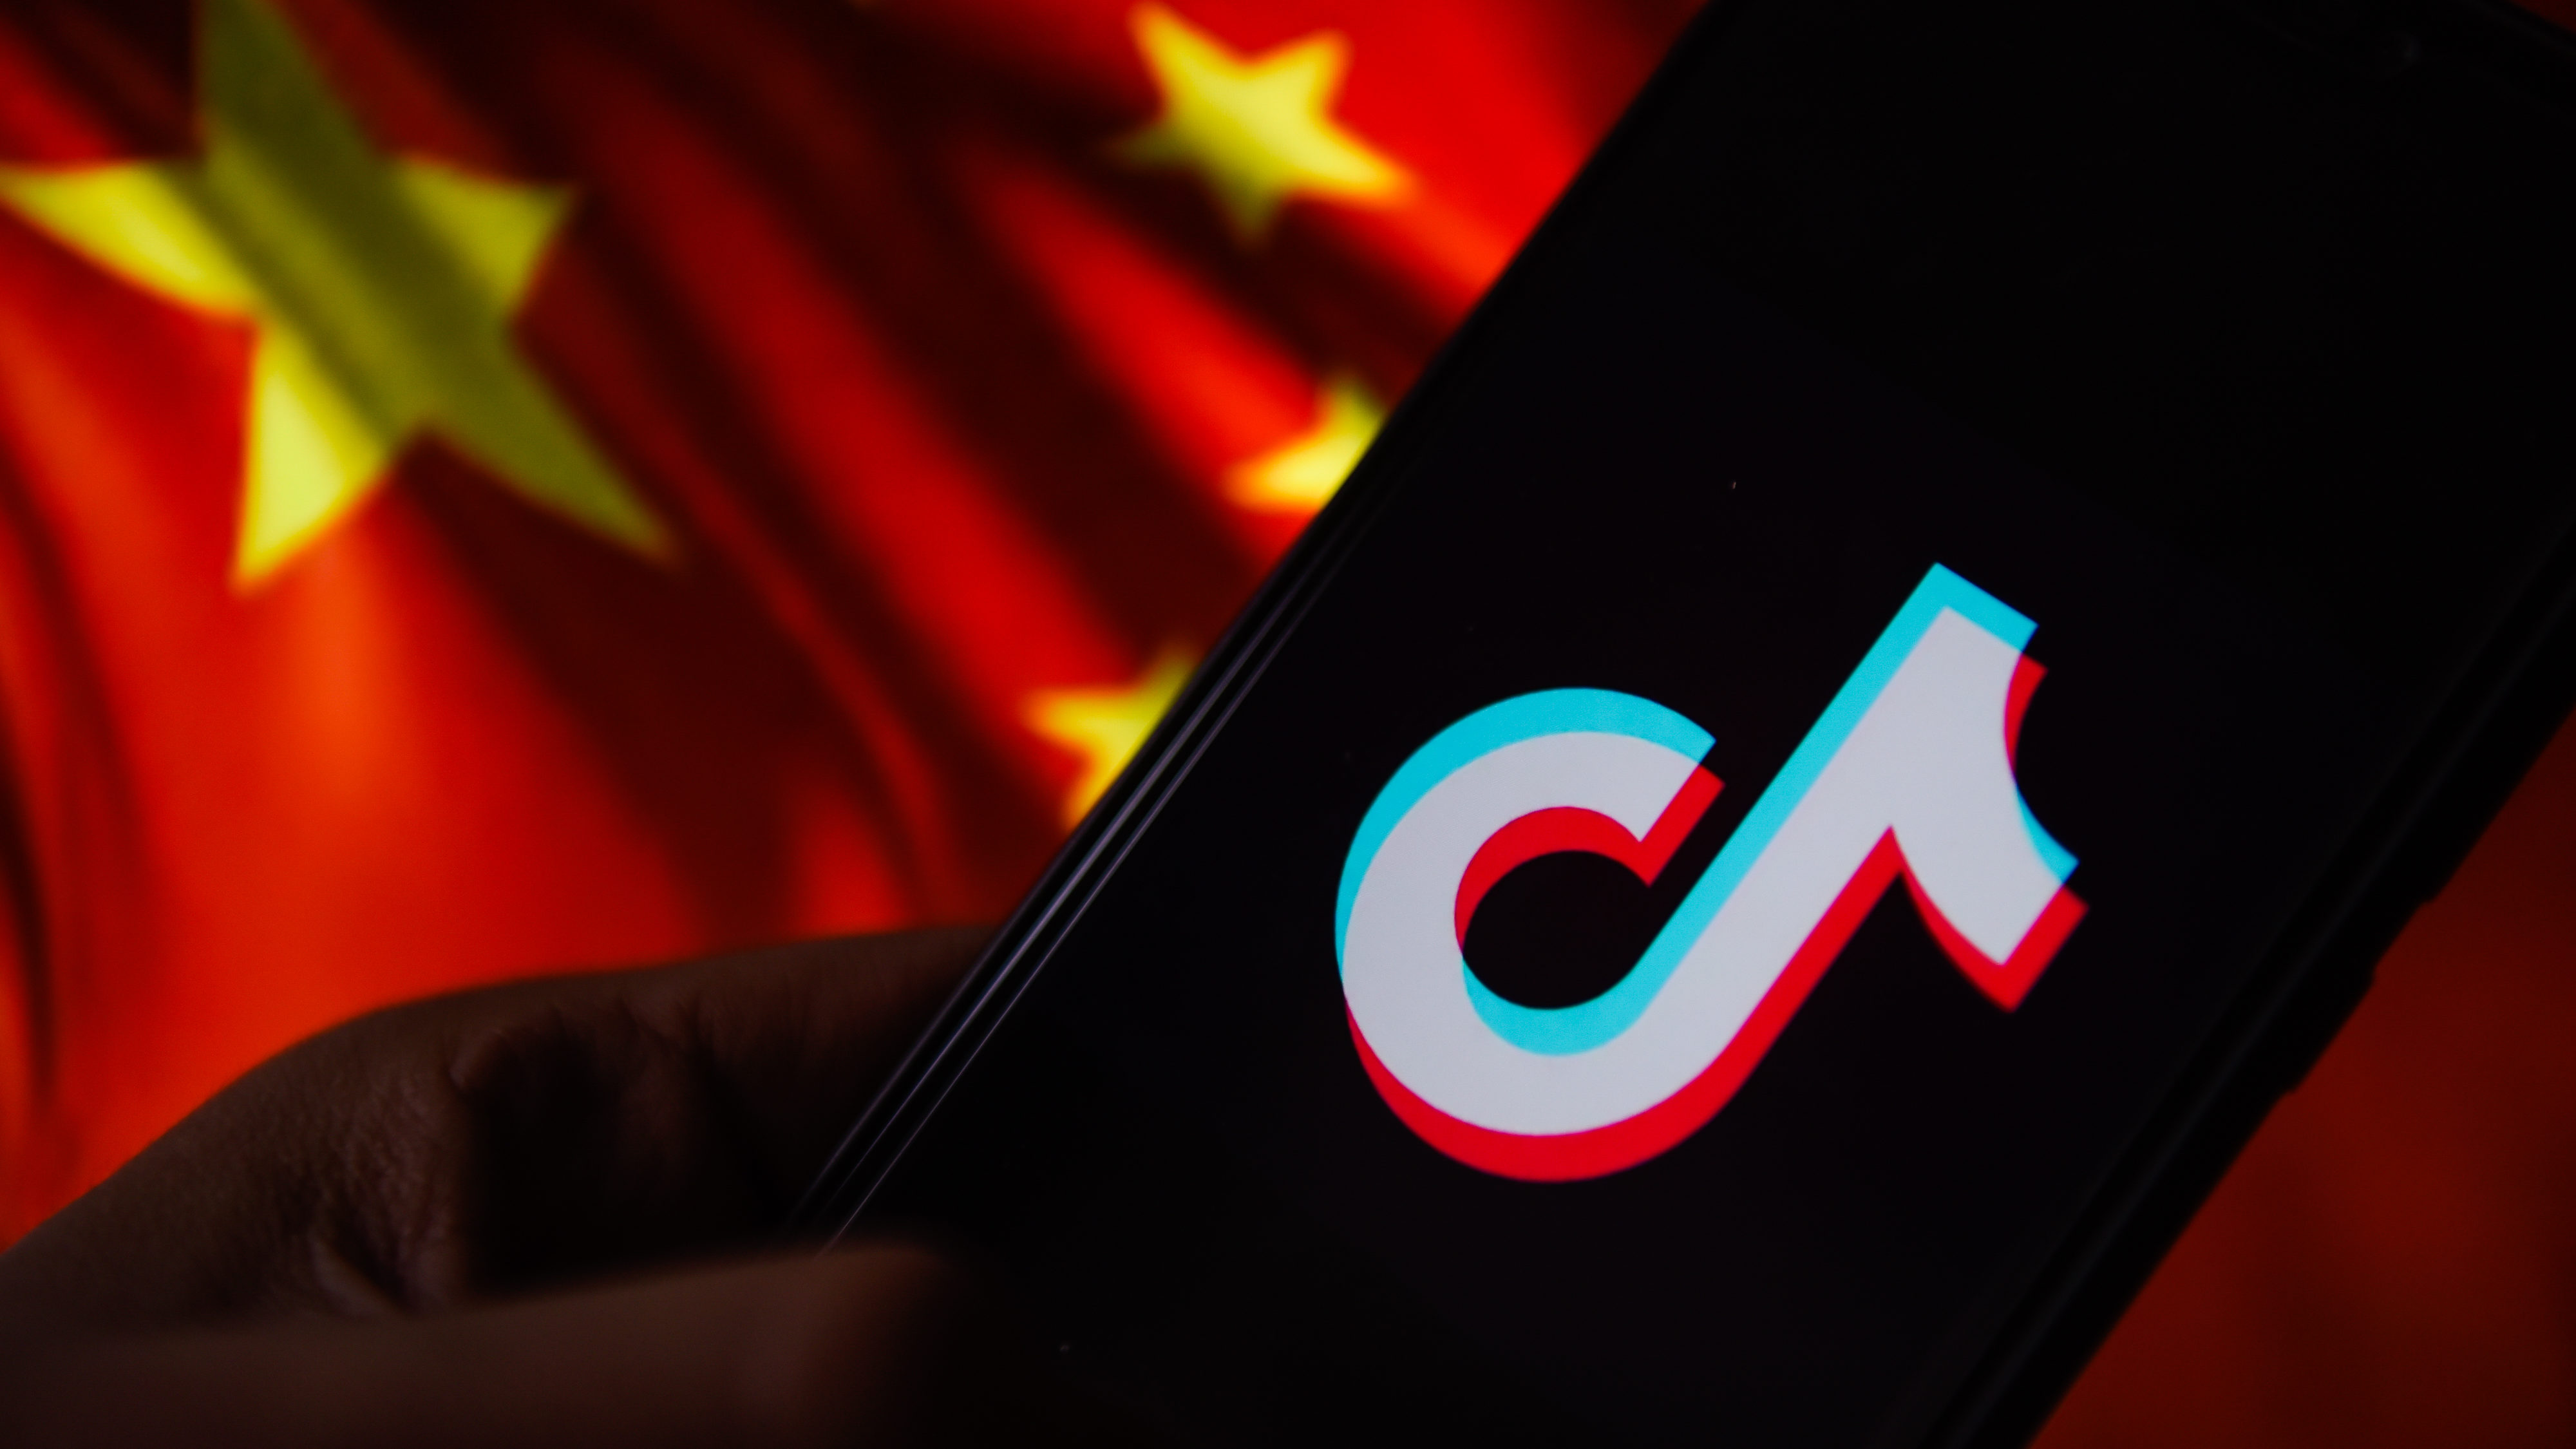 TikTok and Chinese Technologies in 2020